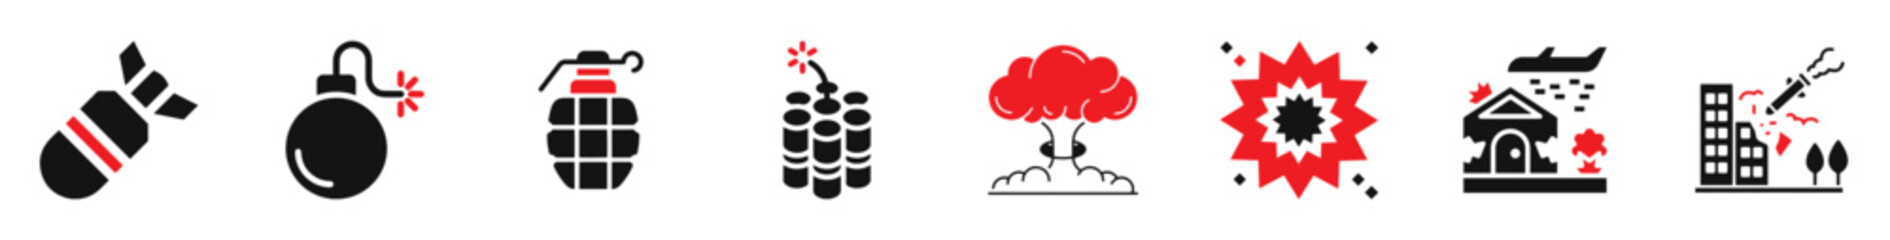 Bomb icon collection of explosion. Damage on the destroyed city, various explosives and effects flat icons design.